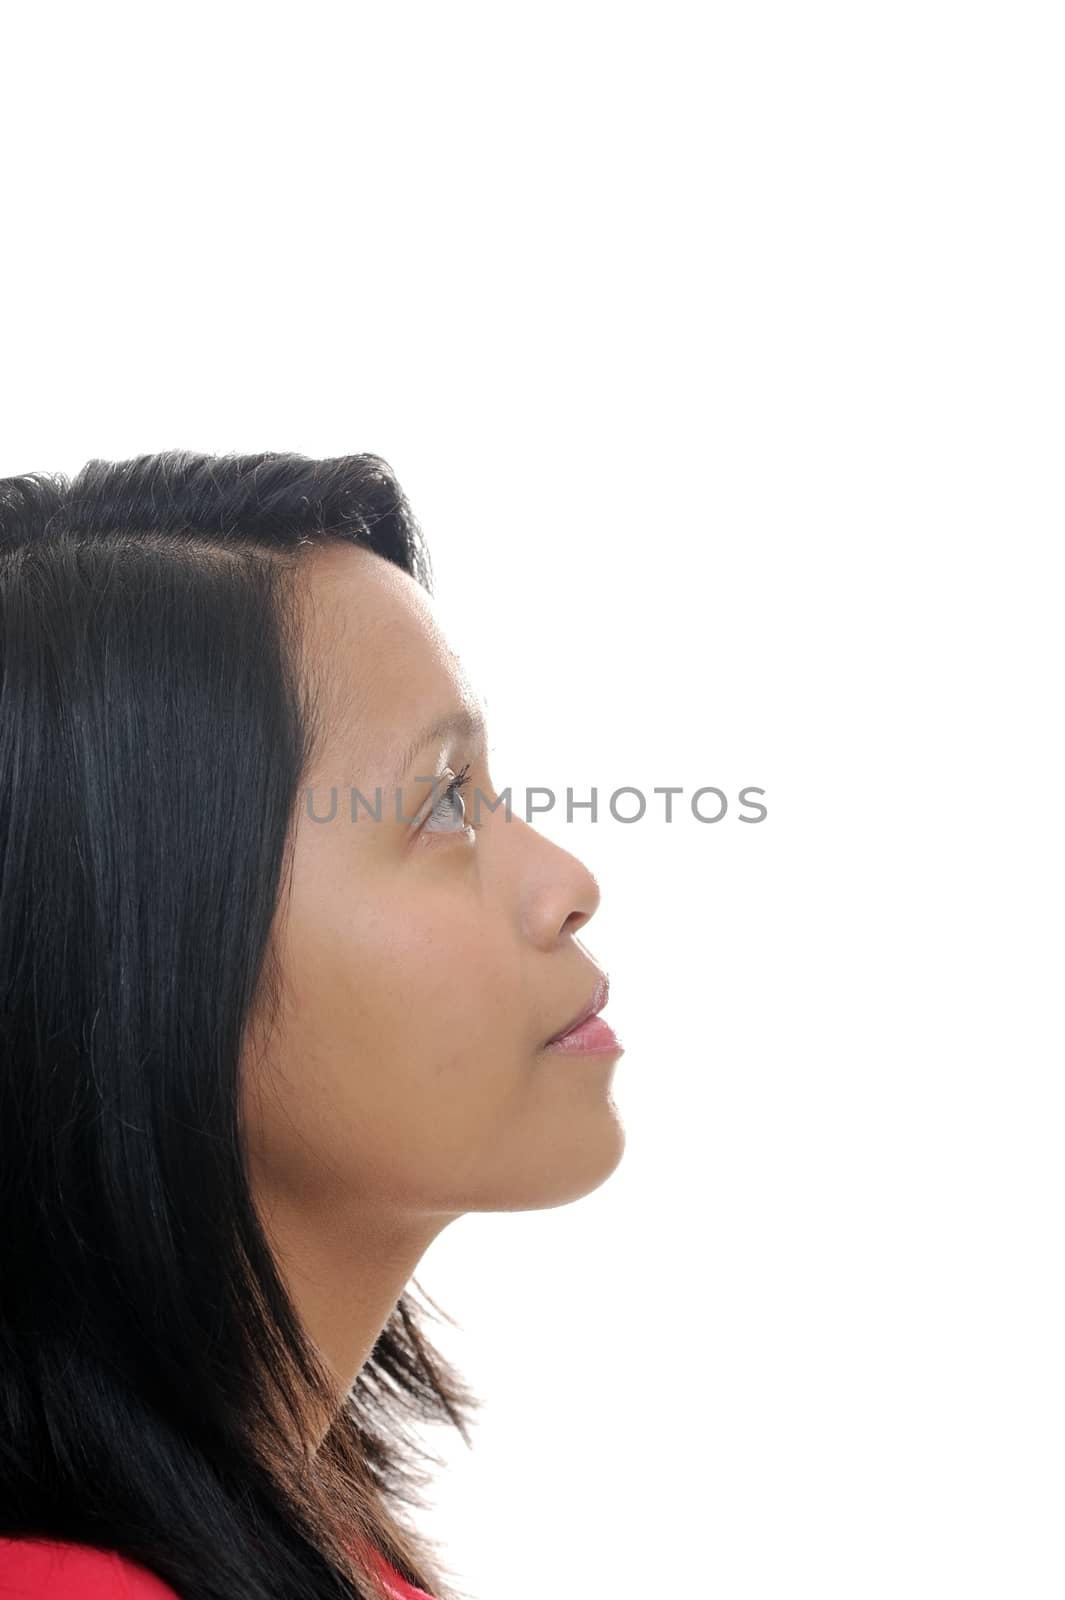 Asian girl profile of face looking up